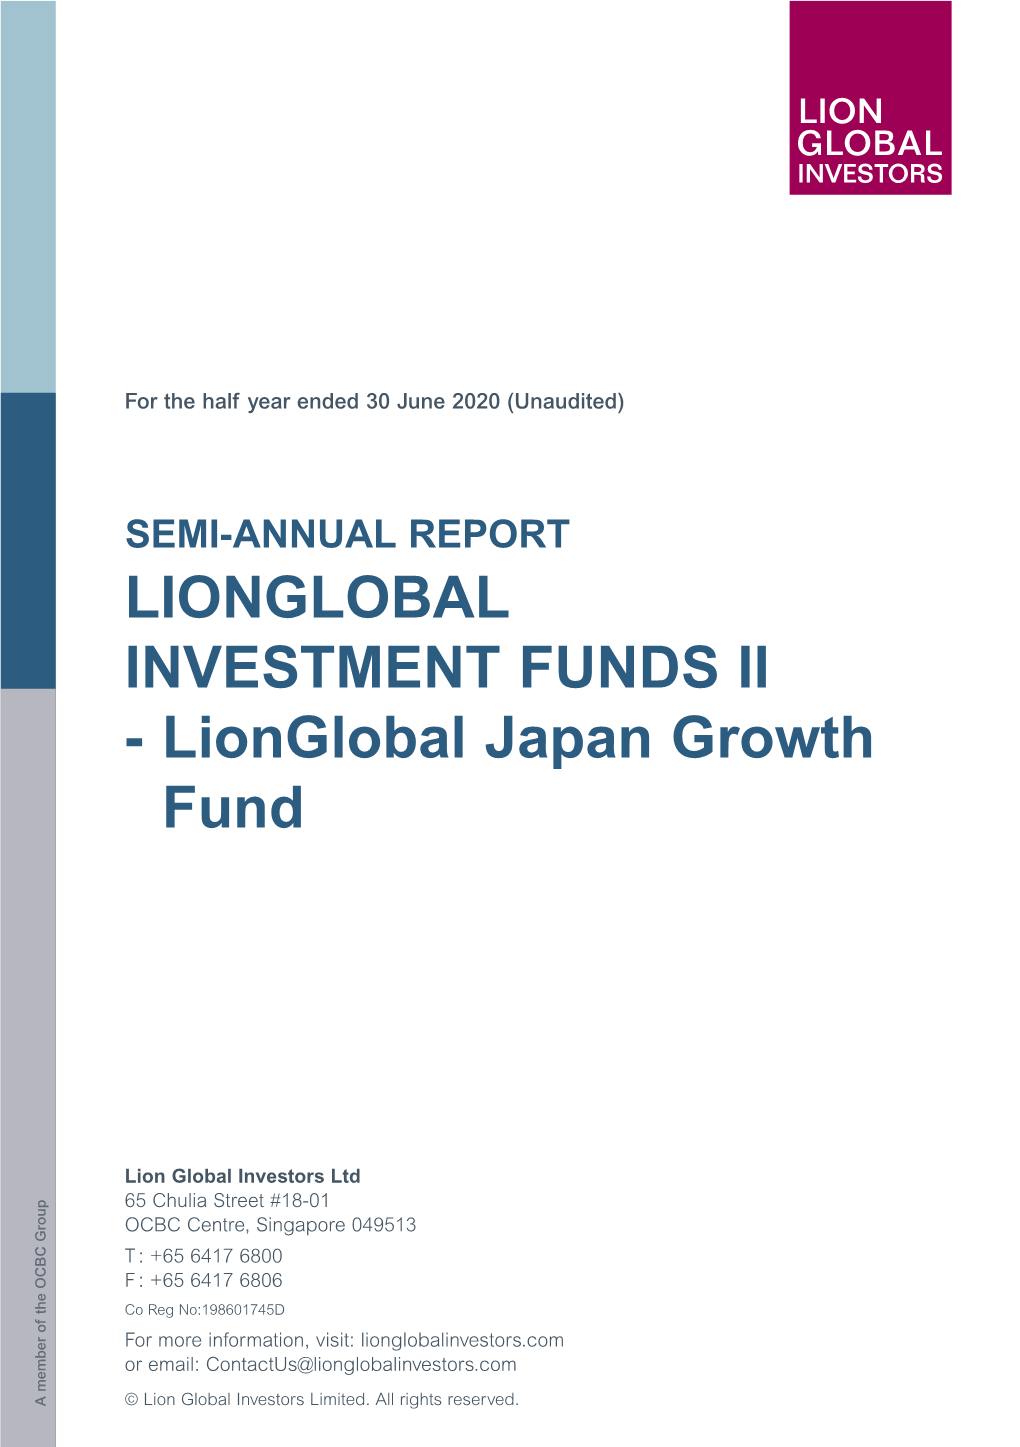 Lionglobal Japan Growth Fund